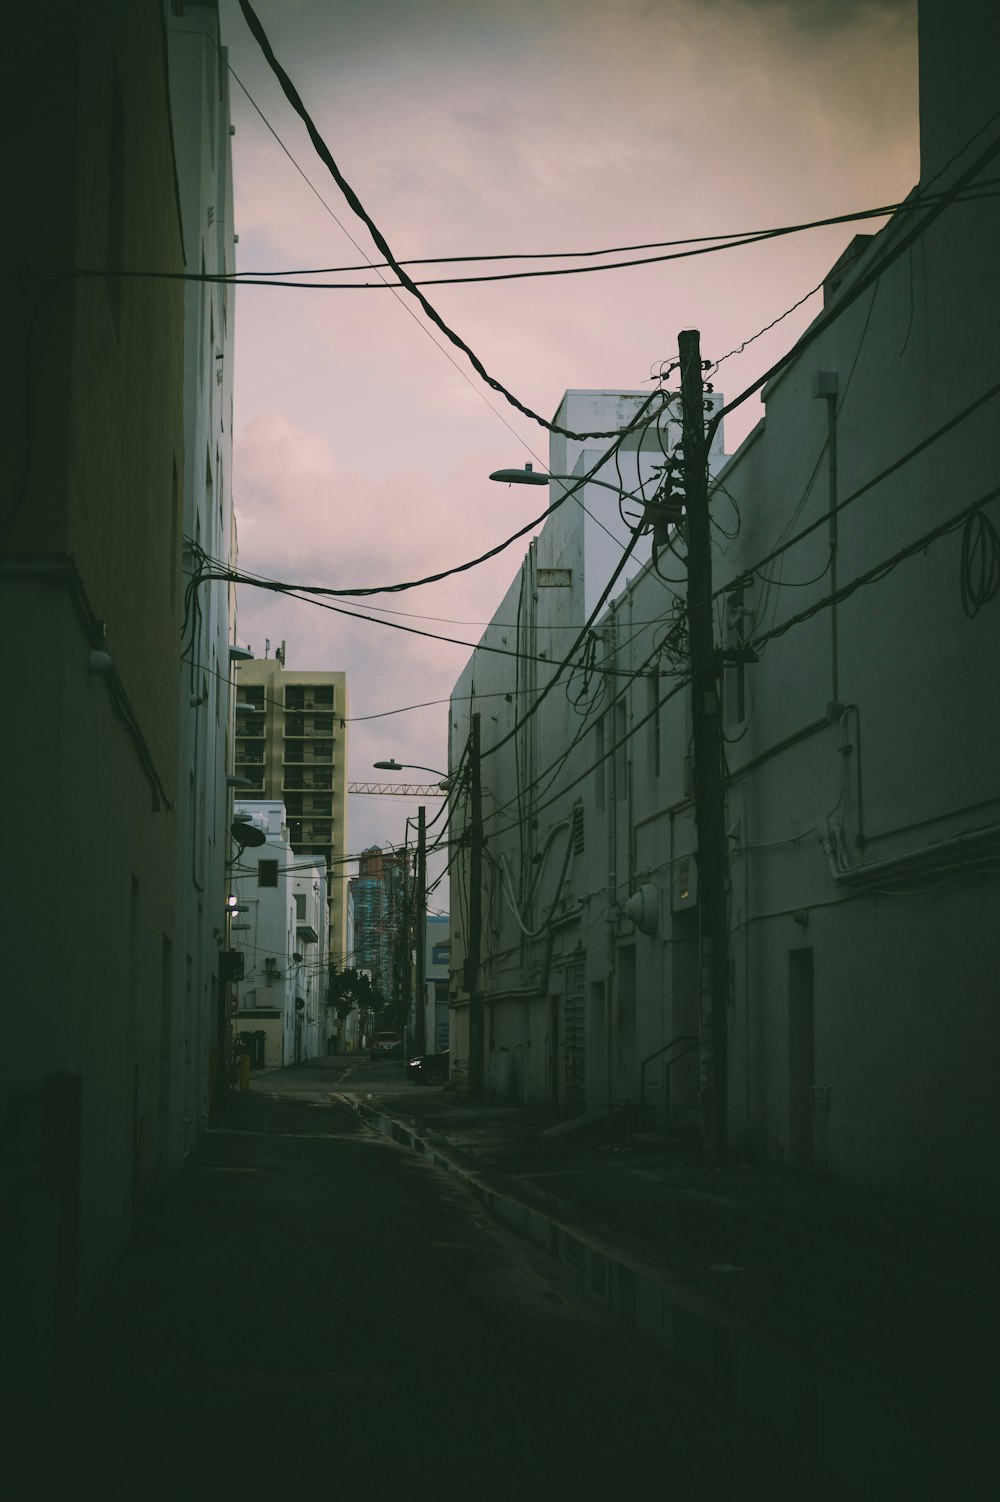 a dark alley way with power lines above it